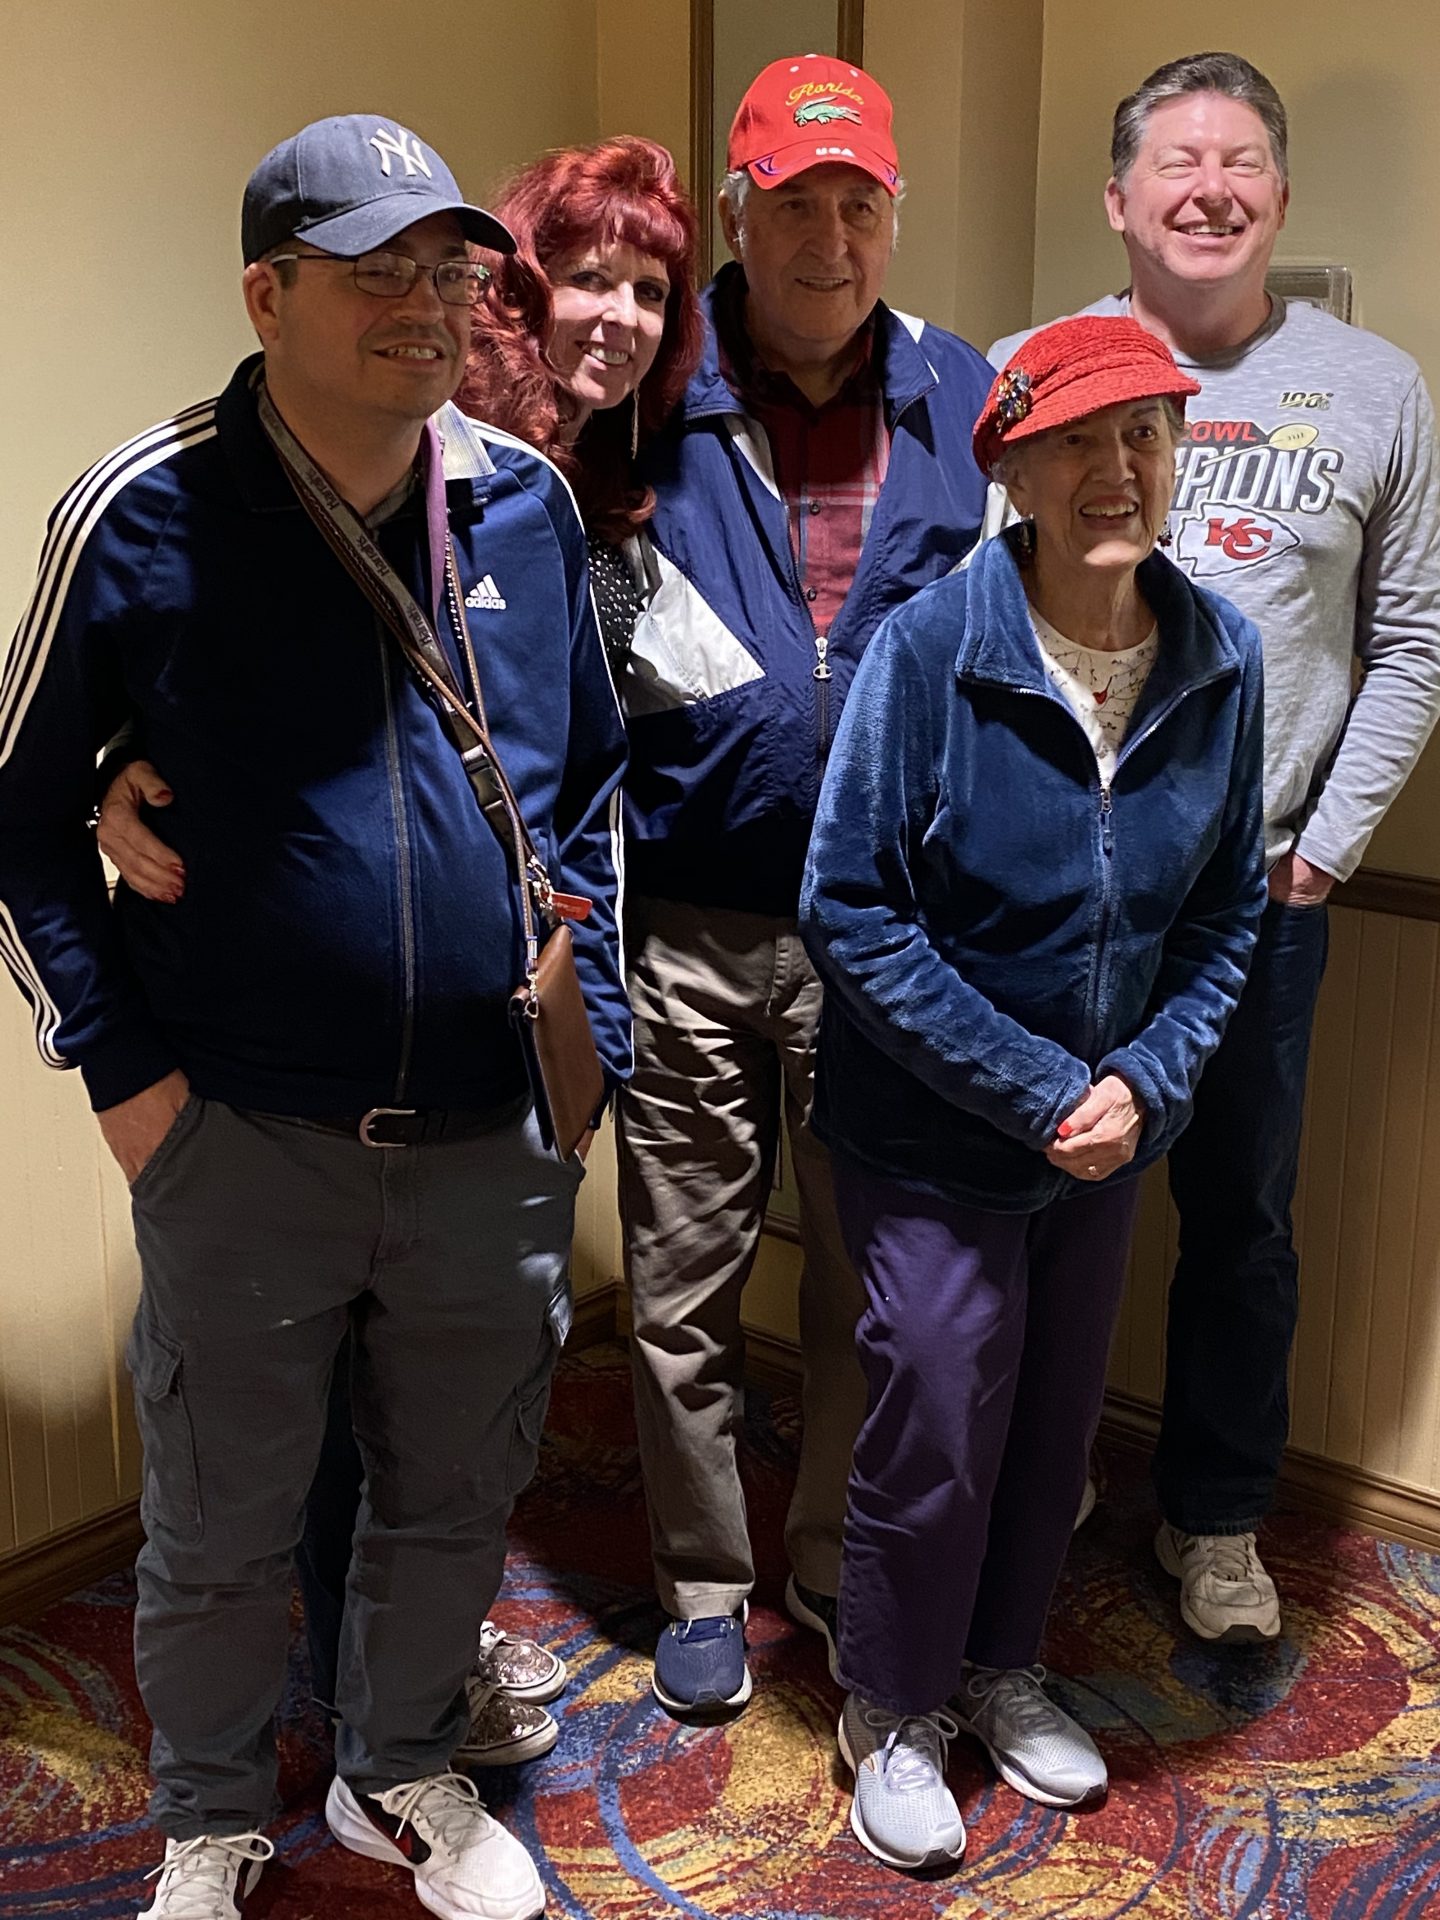 Mom and Dad with Cindy, Kevin, and Roger Allen at Laughlin, NV in March 2020.